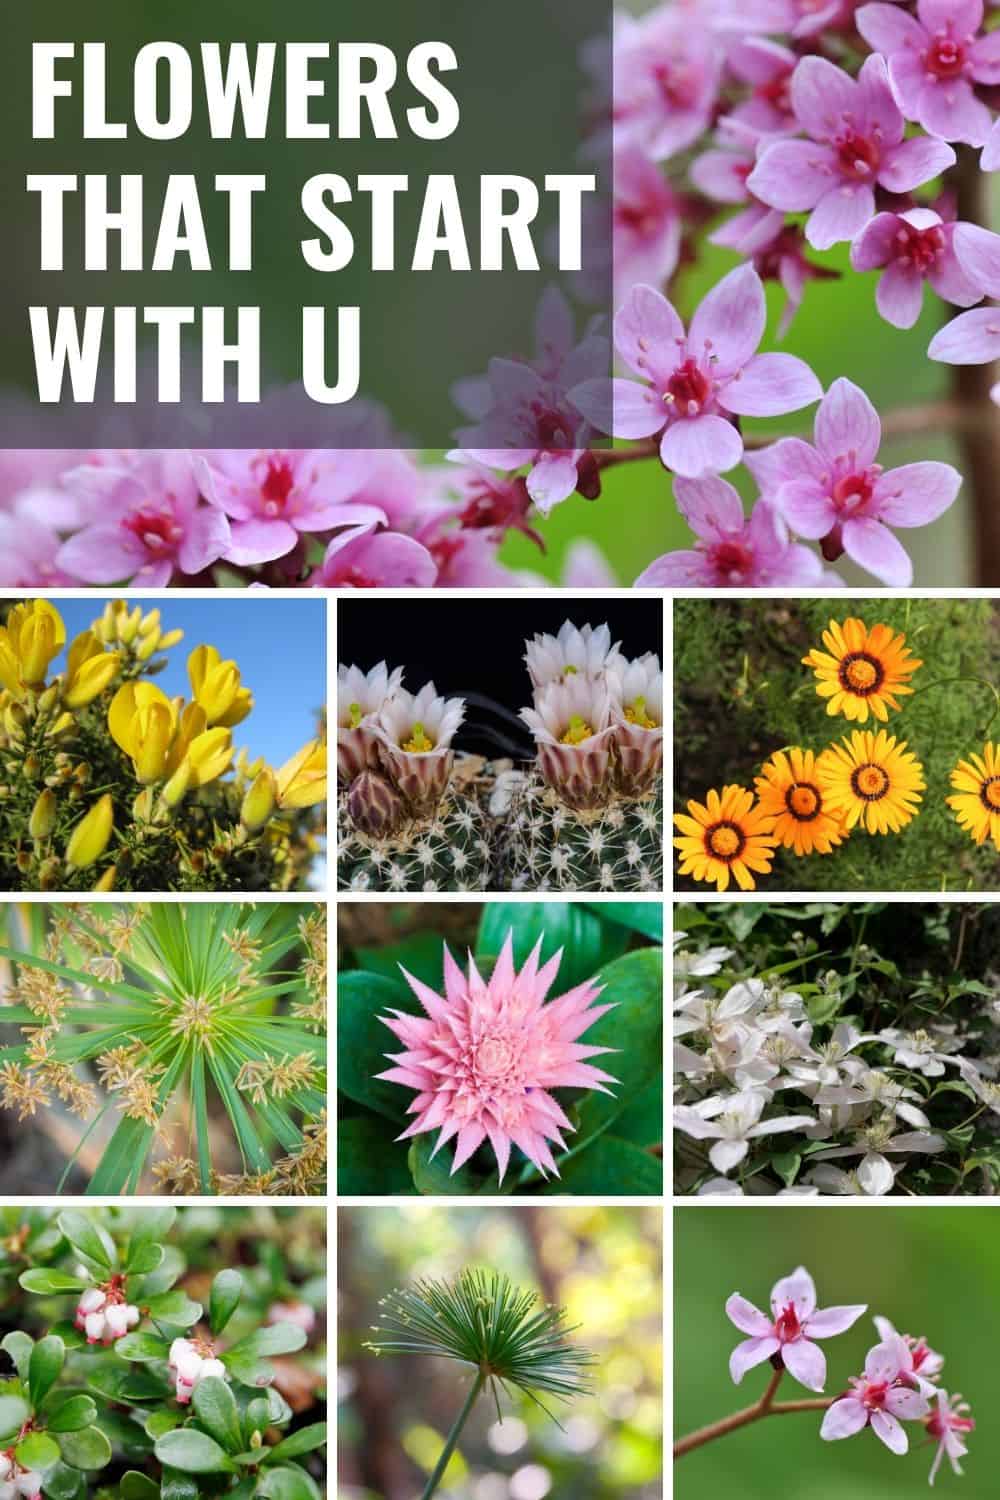 26 Flowers That Start With U and X, Desert Plants, Full List